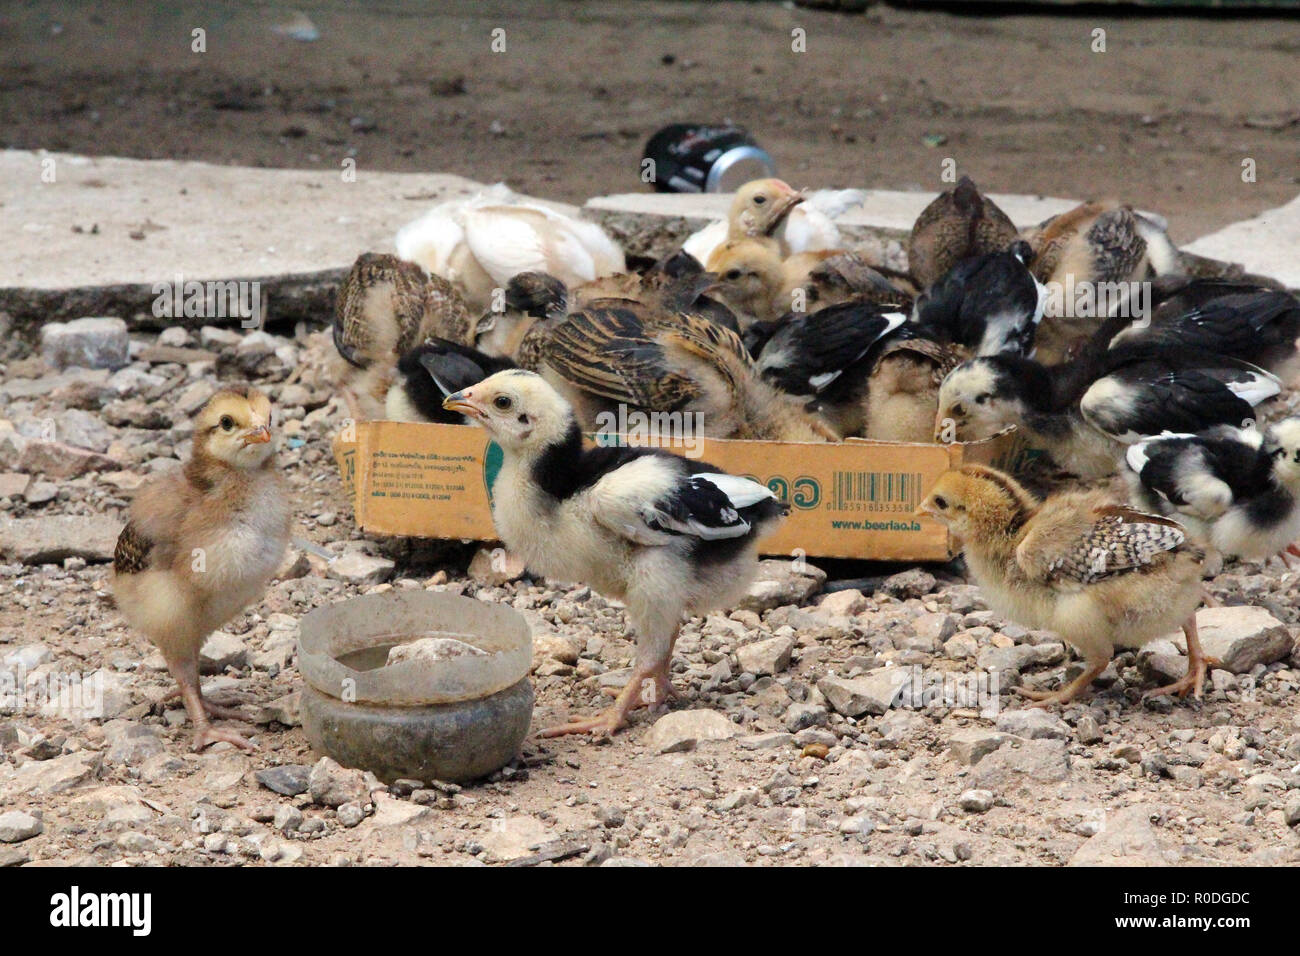 More than a dozen chicks feed in a cardboard box lid, northern Laos Stock Photo